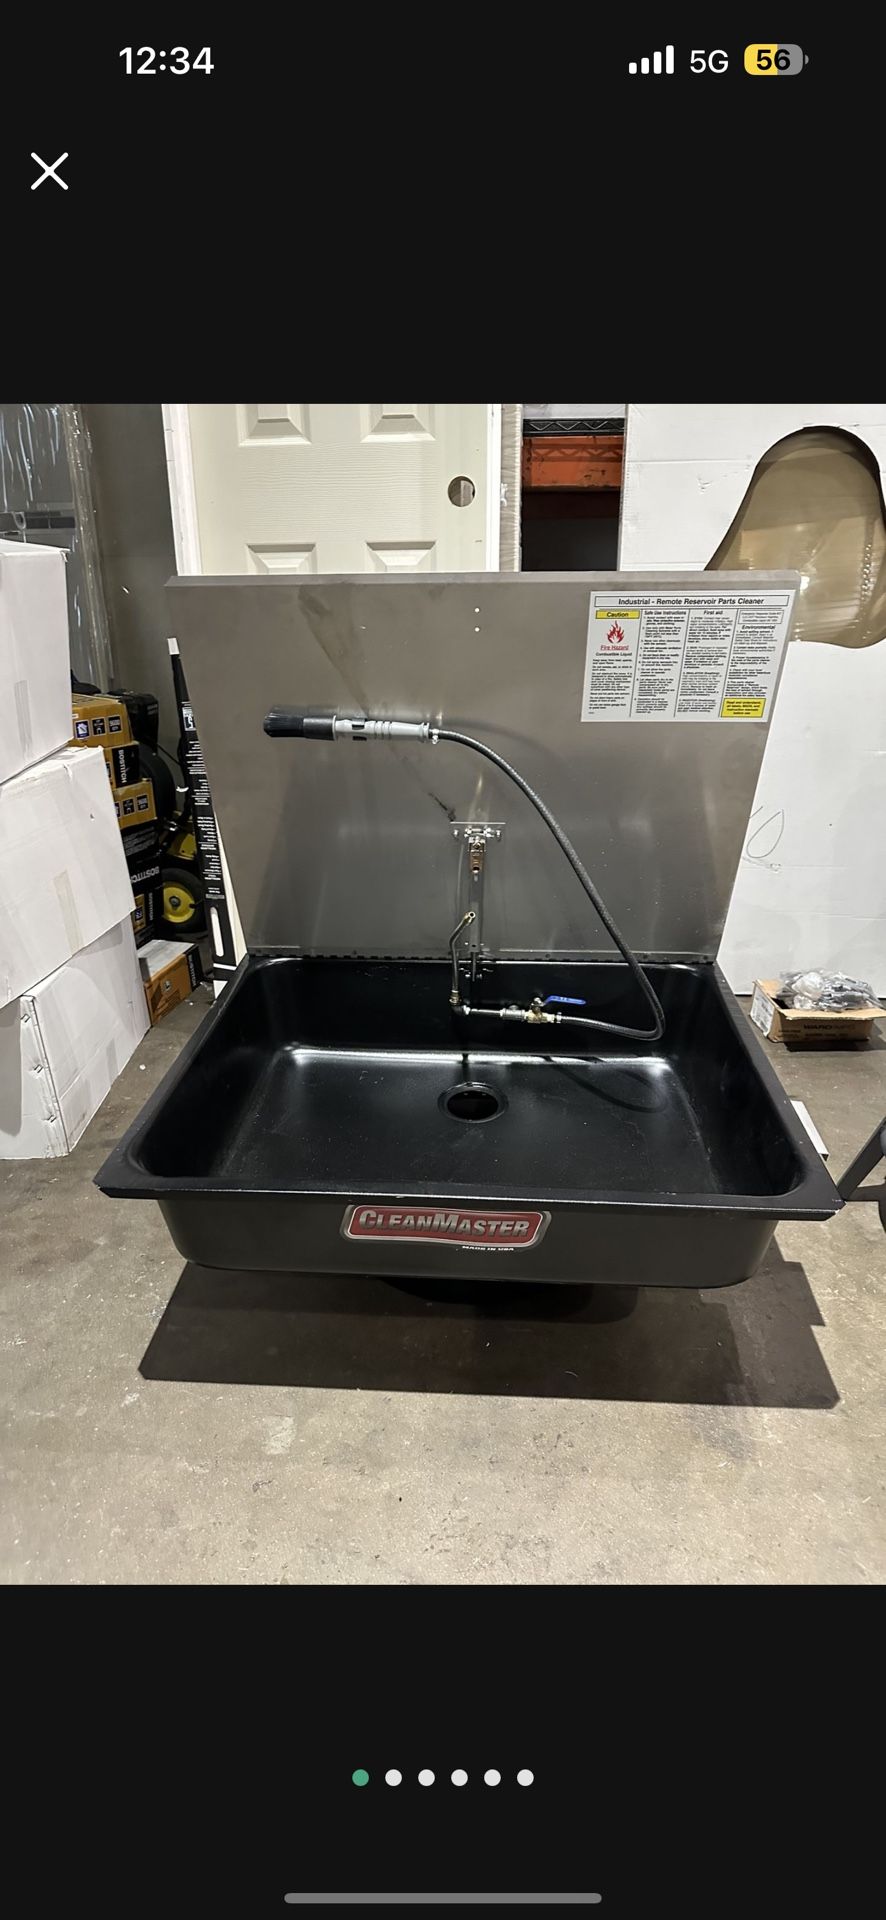 Fountain CleanMaster 230, 30-gallon Drawn- Sink(Drum Sold Seperately)